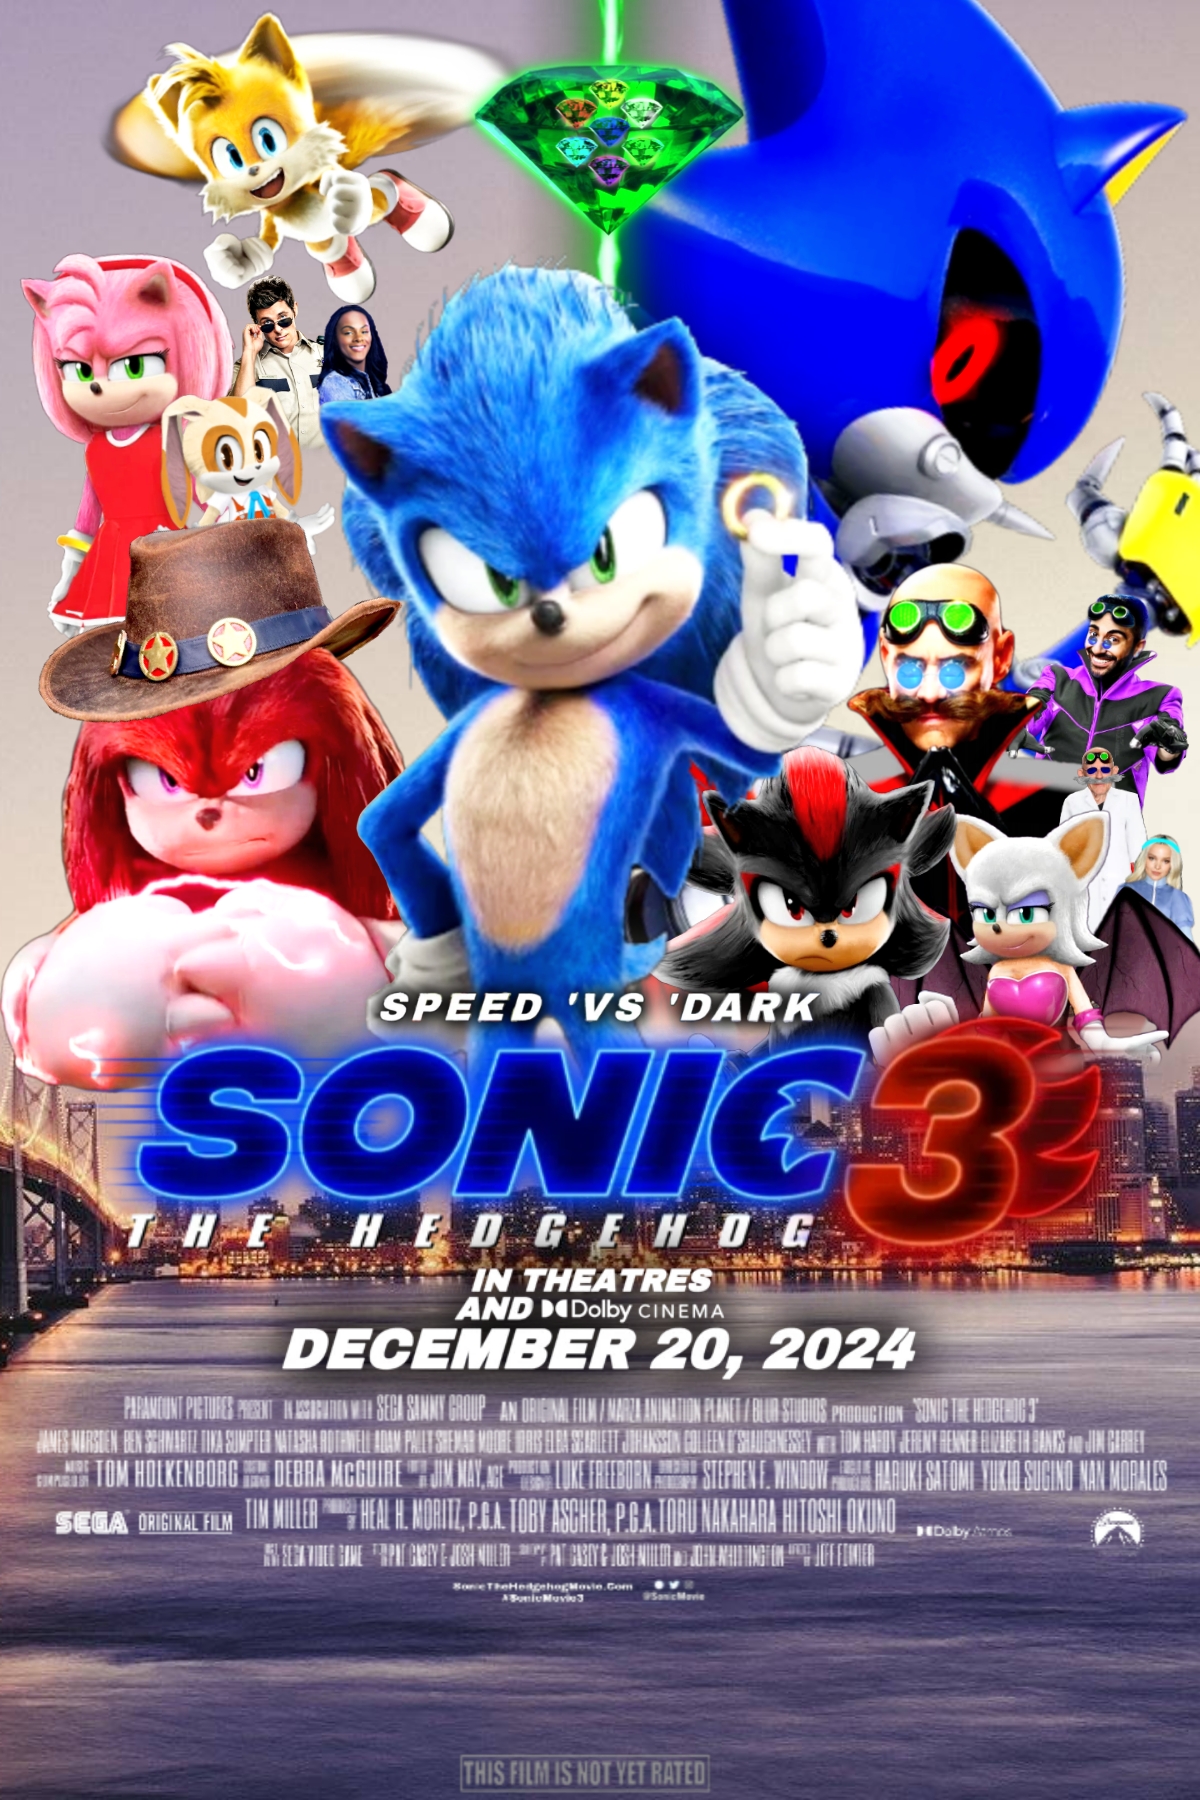 Sonic the Hedgehog (2006) Poster by Acquainted-Guy on DeviantArt